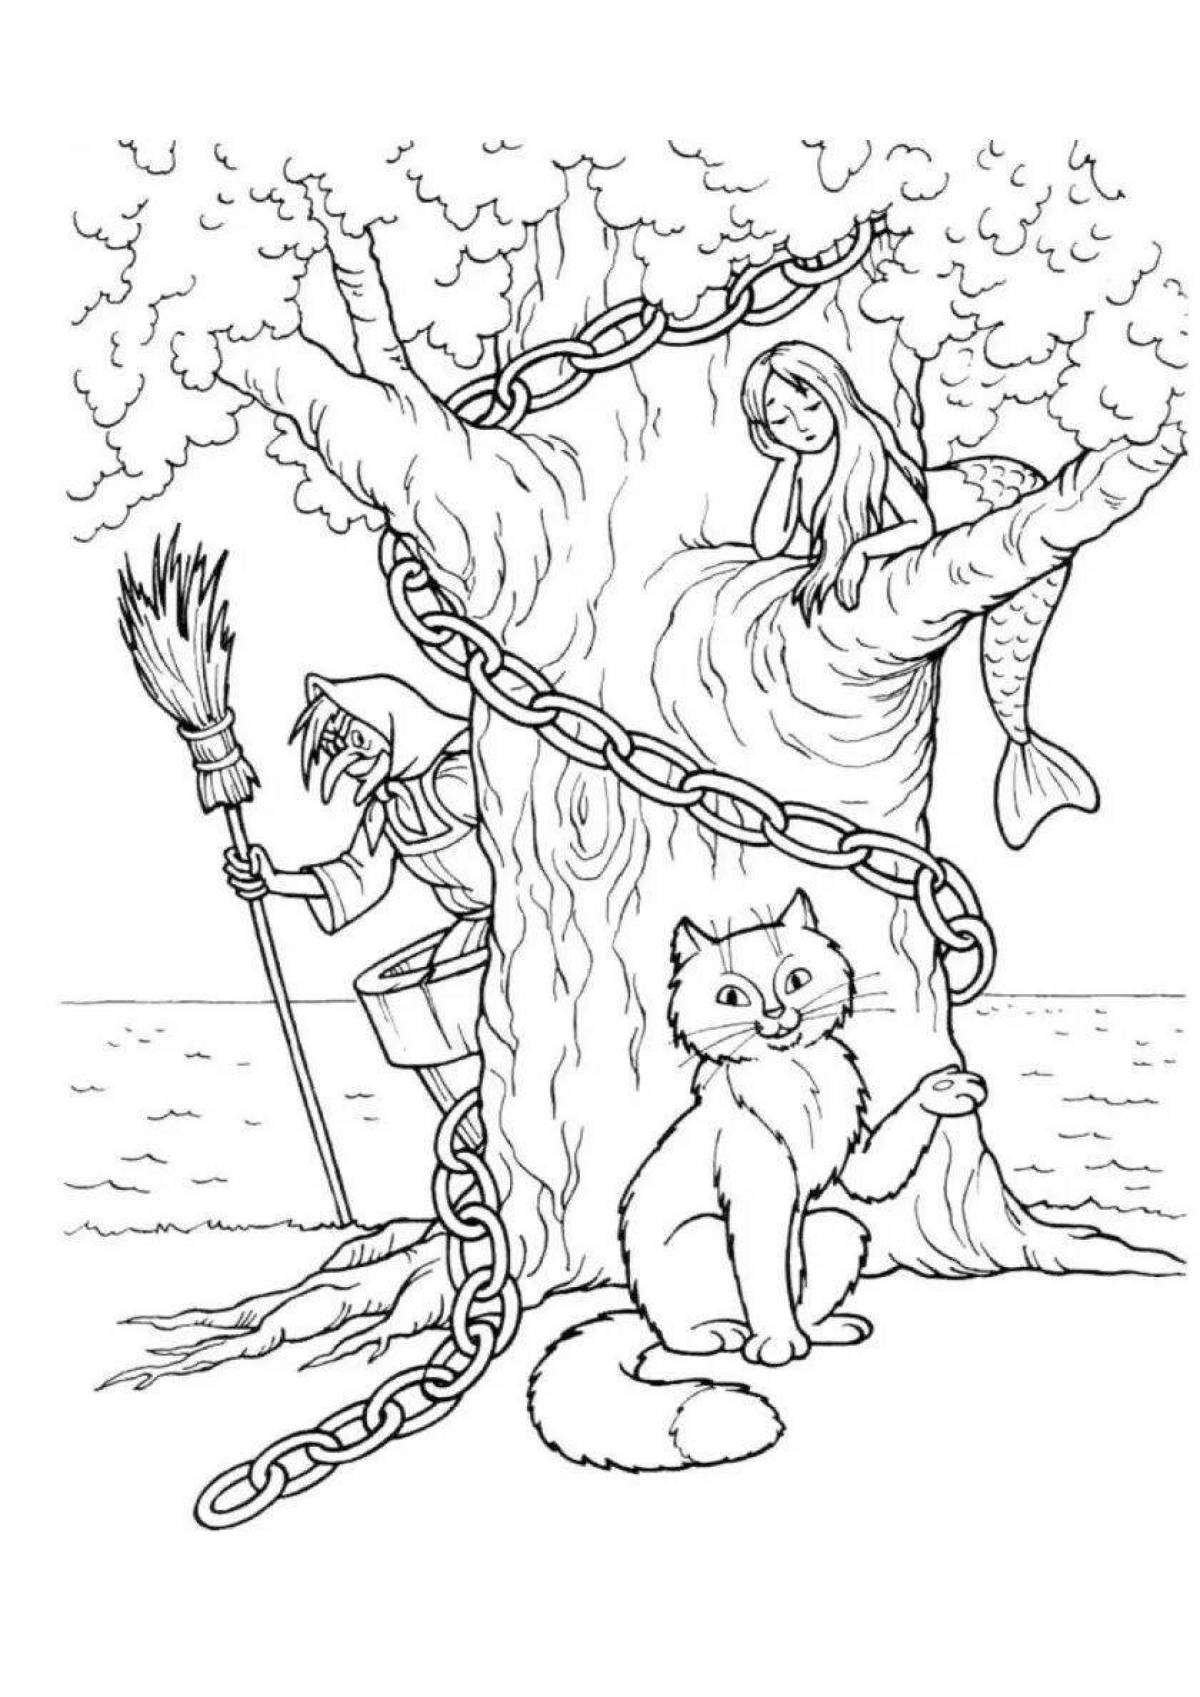 Generous coloring book for children 3-4 years old based on Pushkin's fairy tales